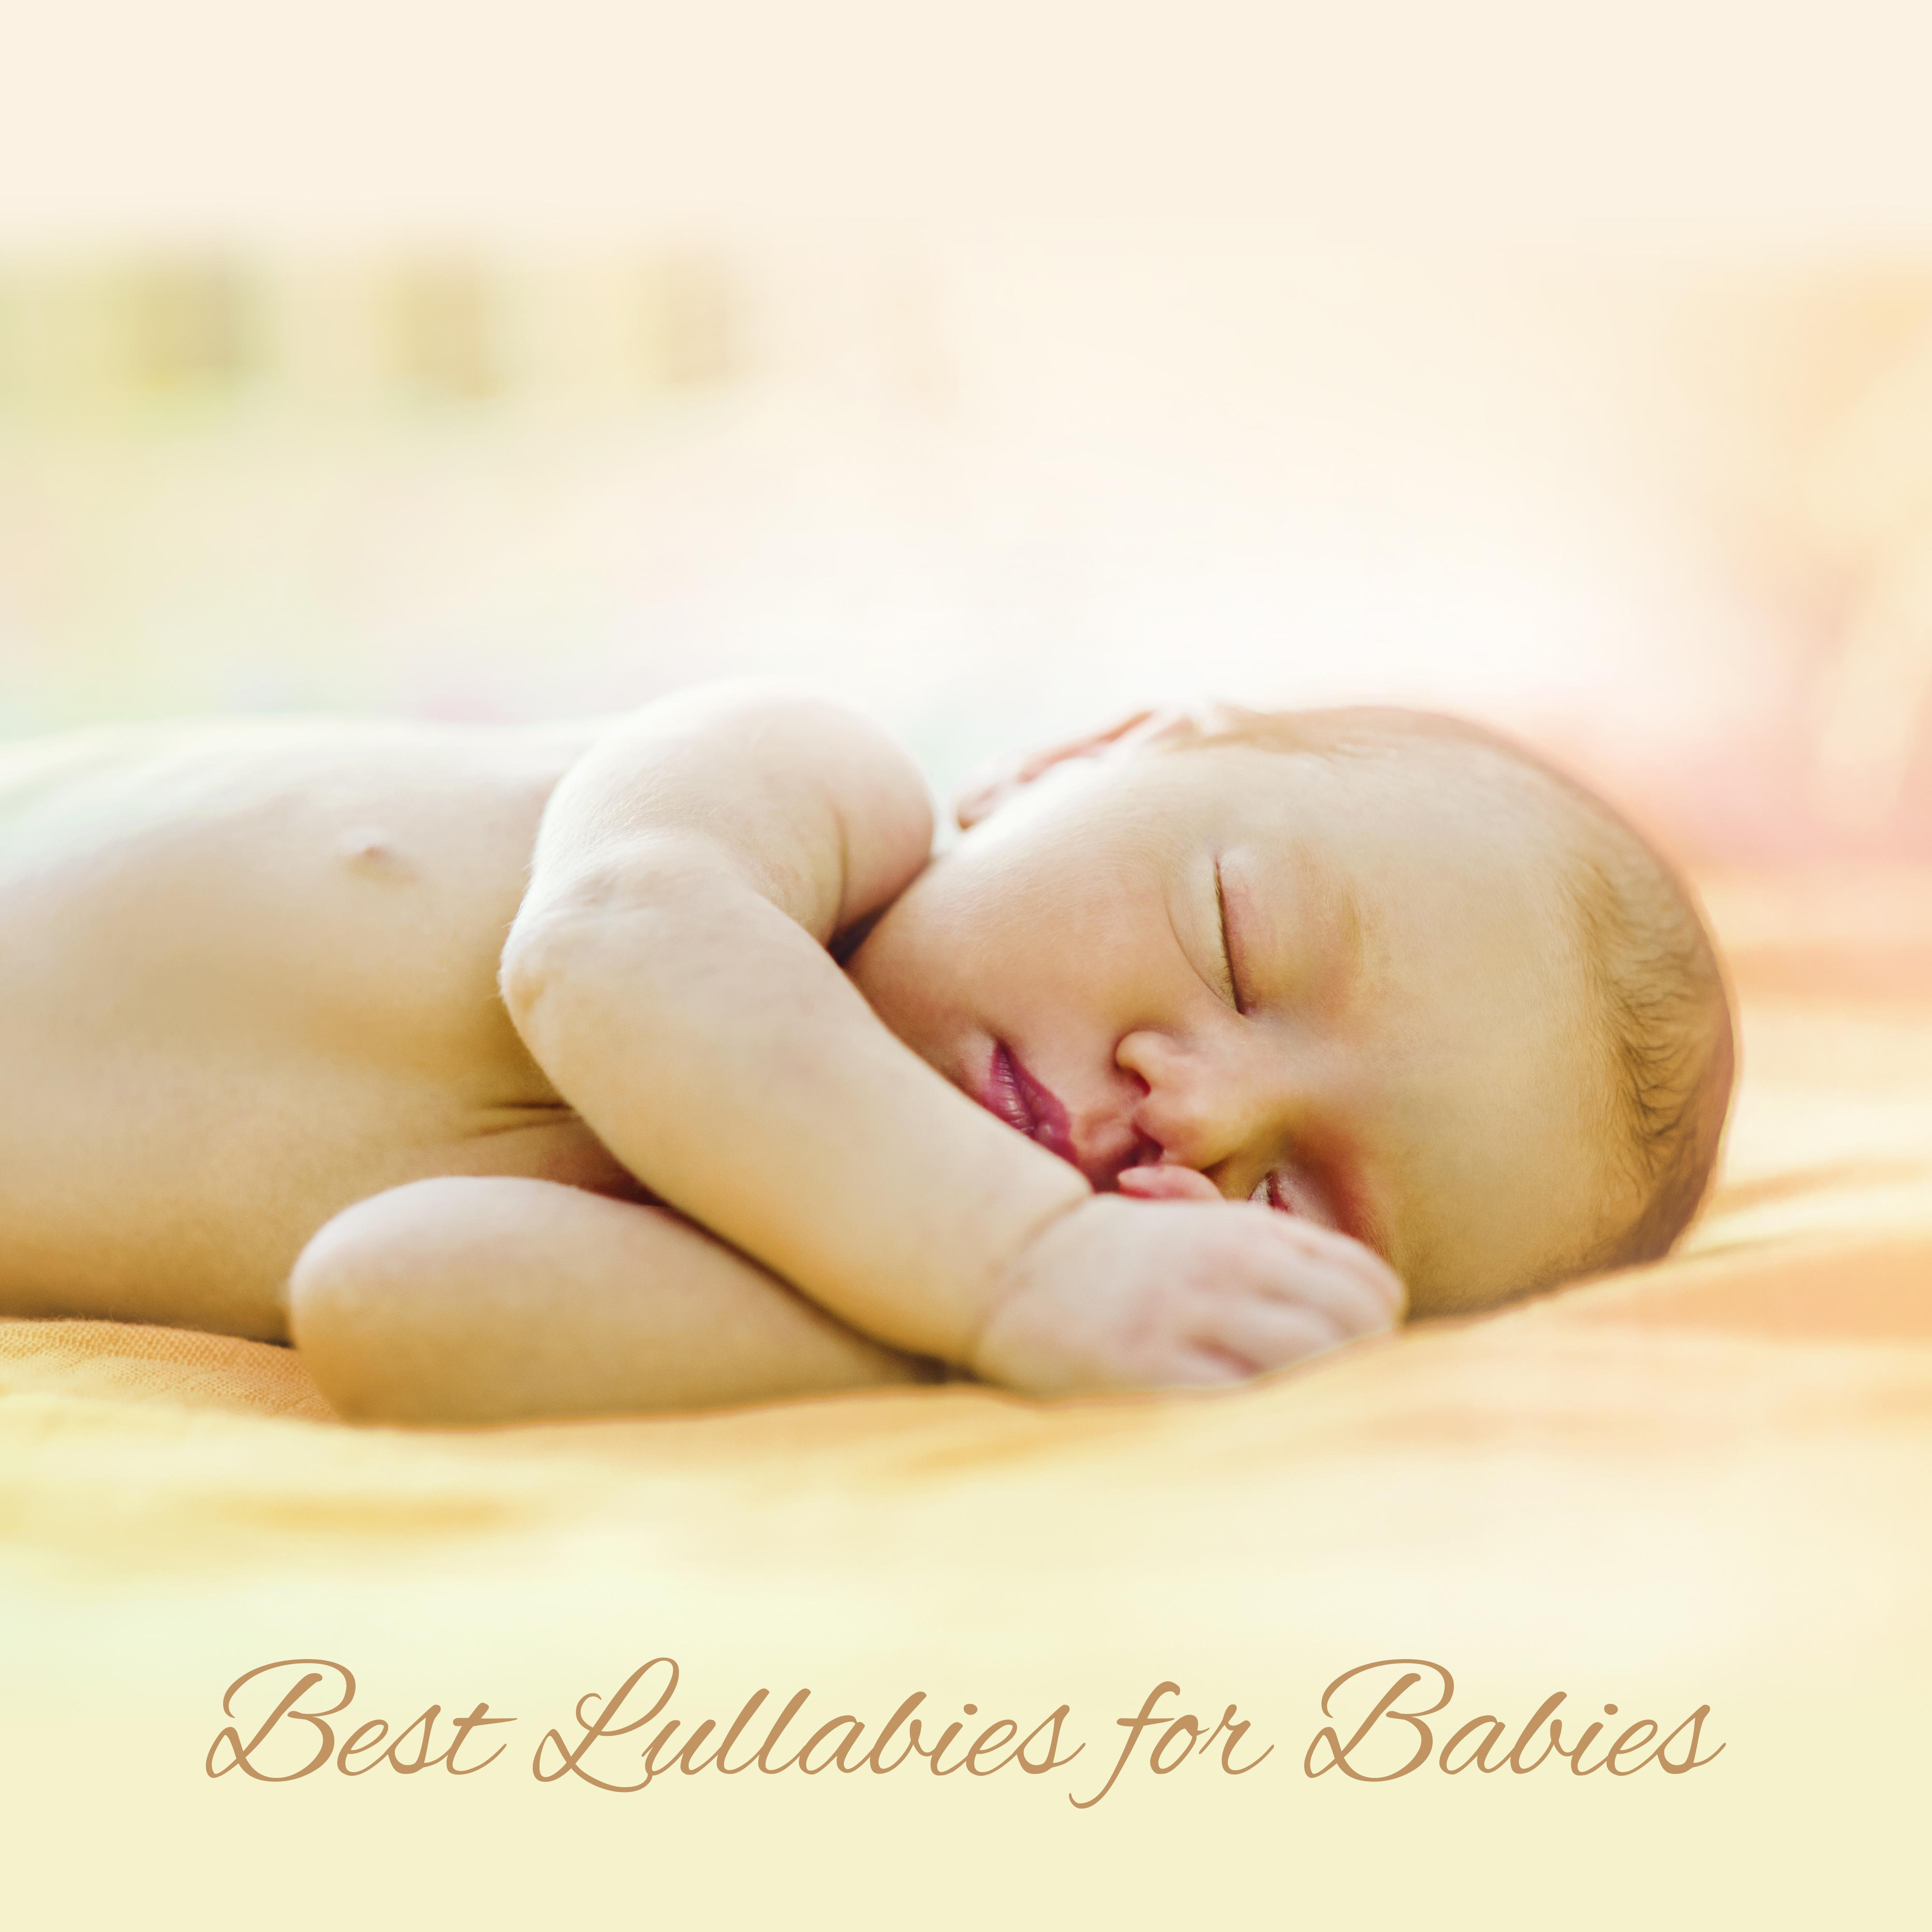 Best Lullabies for Babies – Classical Music for Babies, Soothing Lullabies, Sweet Dream Songs